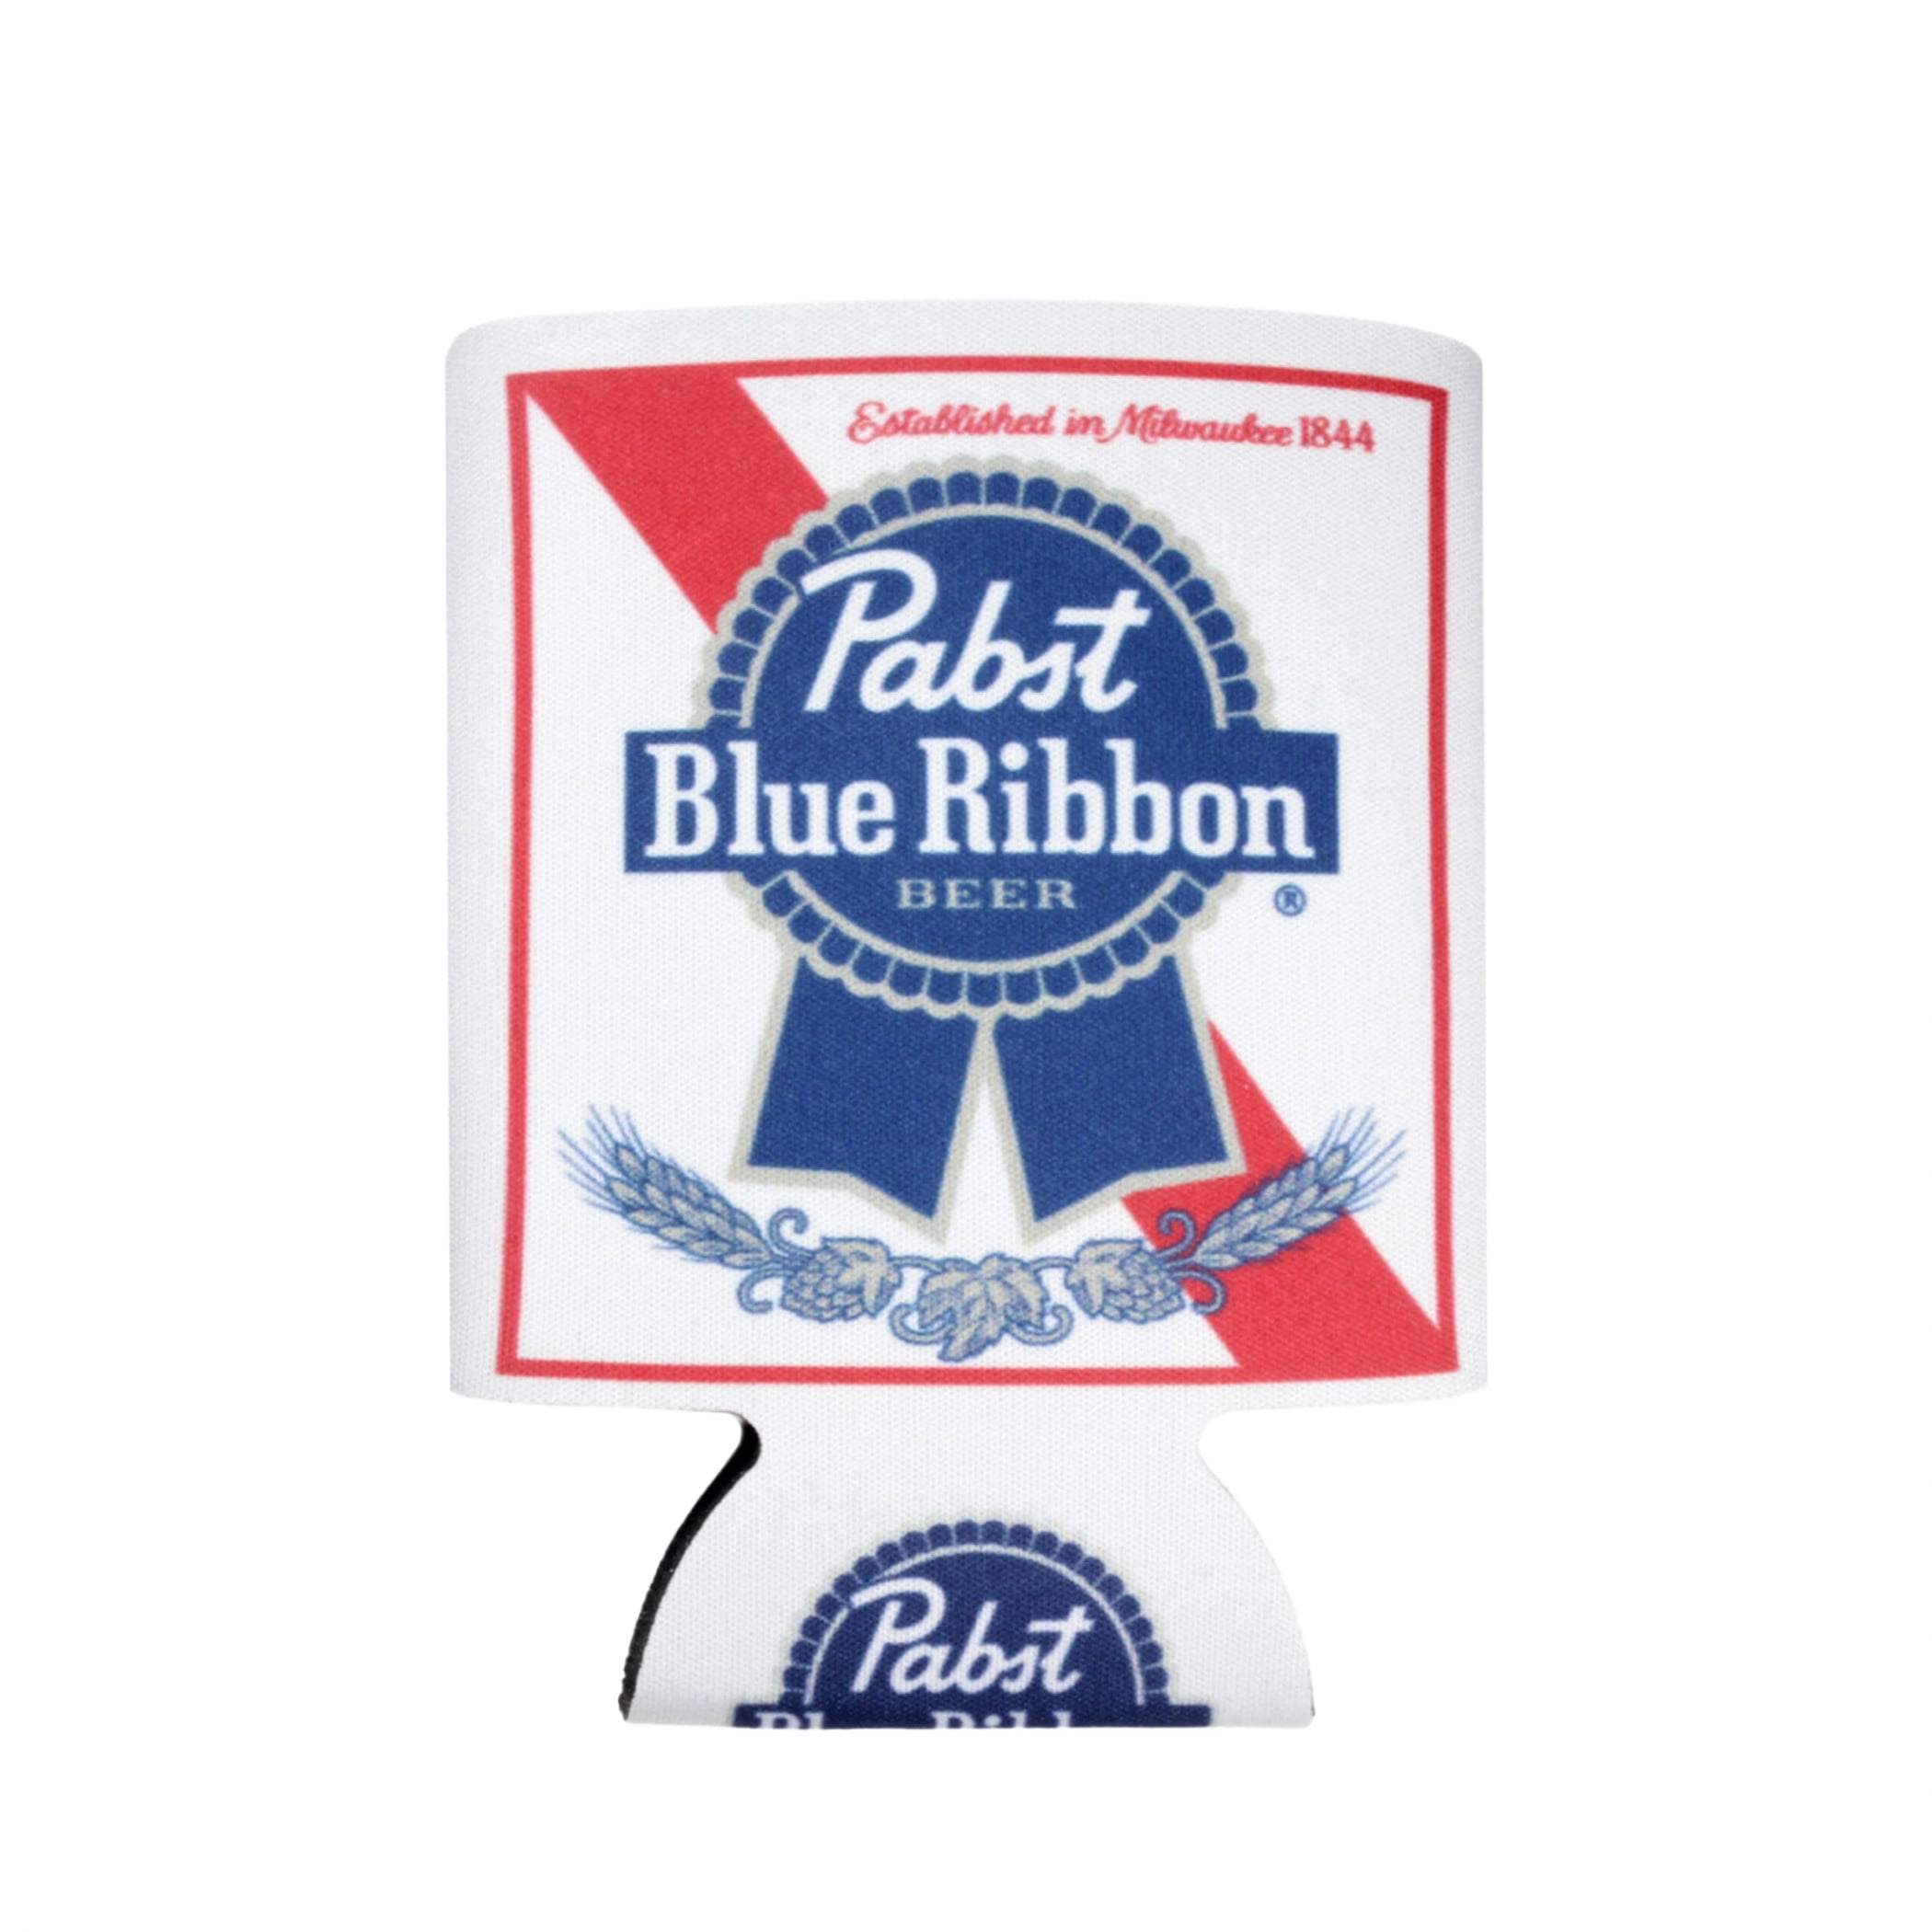 2 Pabst Blue Ribbon Beer Can/Bottle Coolers Wraps Collectible Logo Promotional 